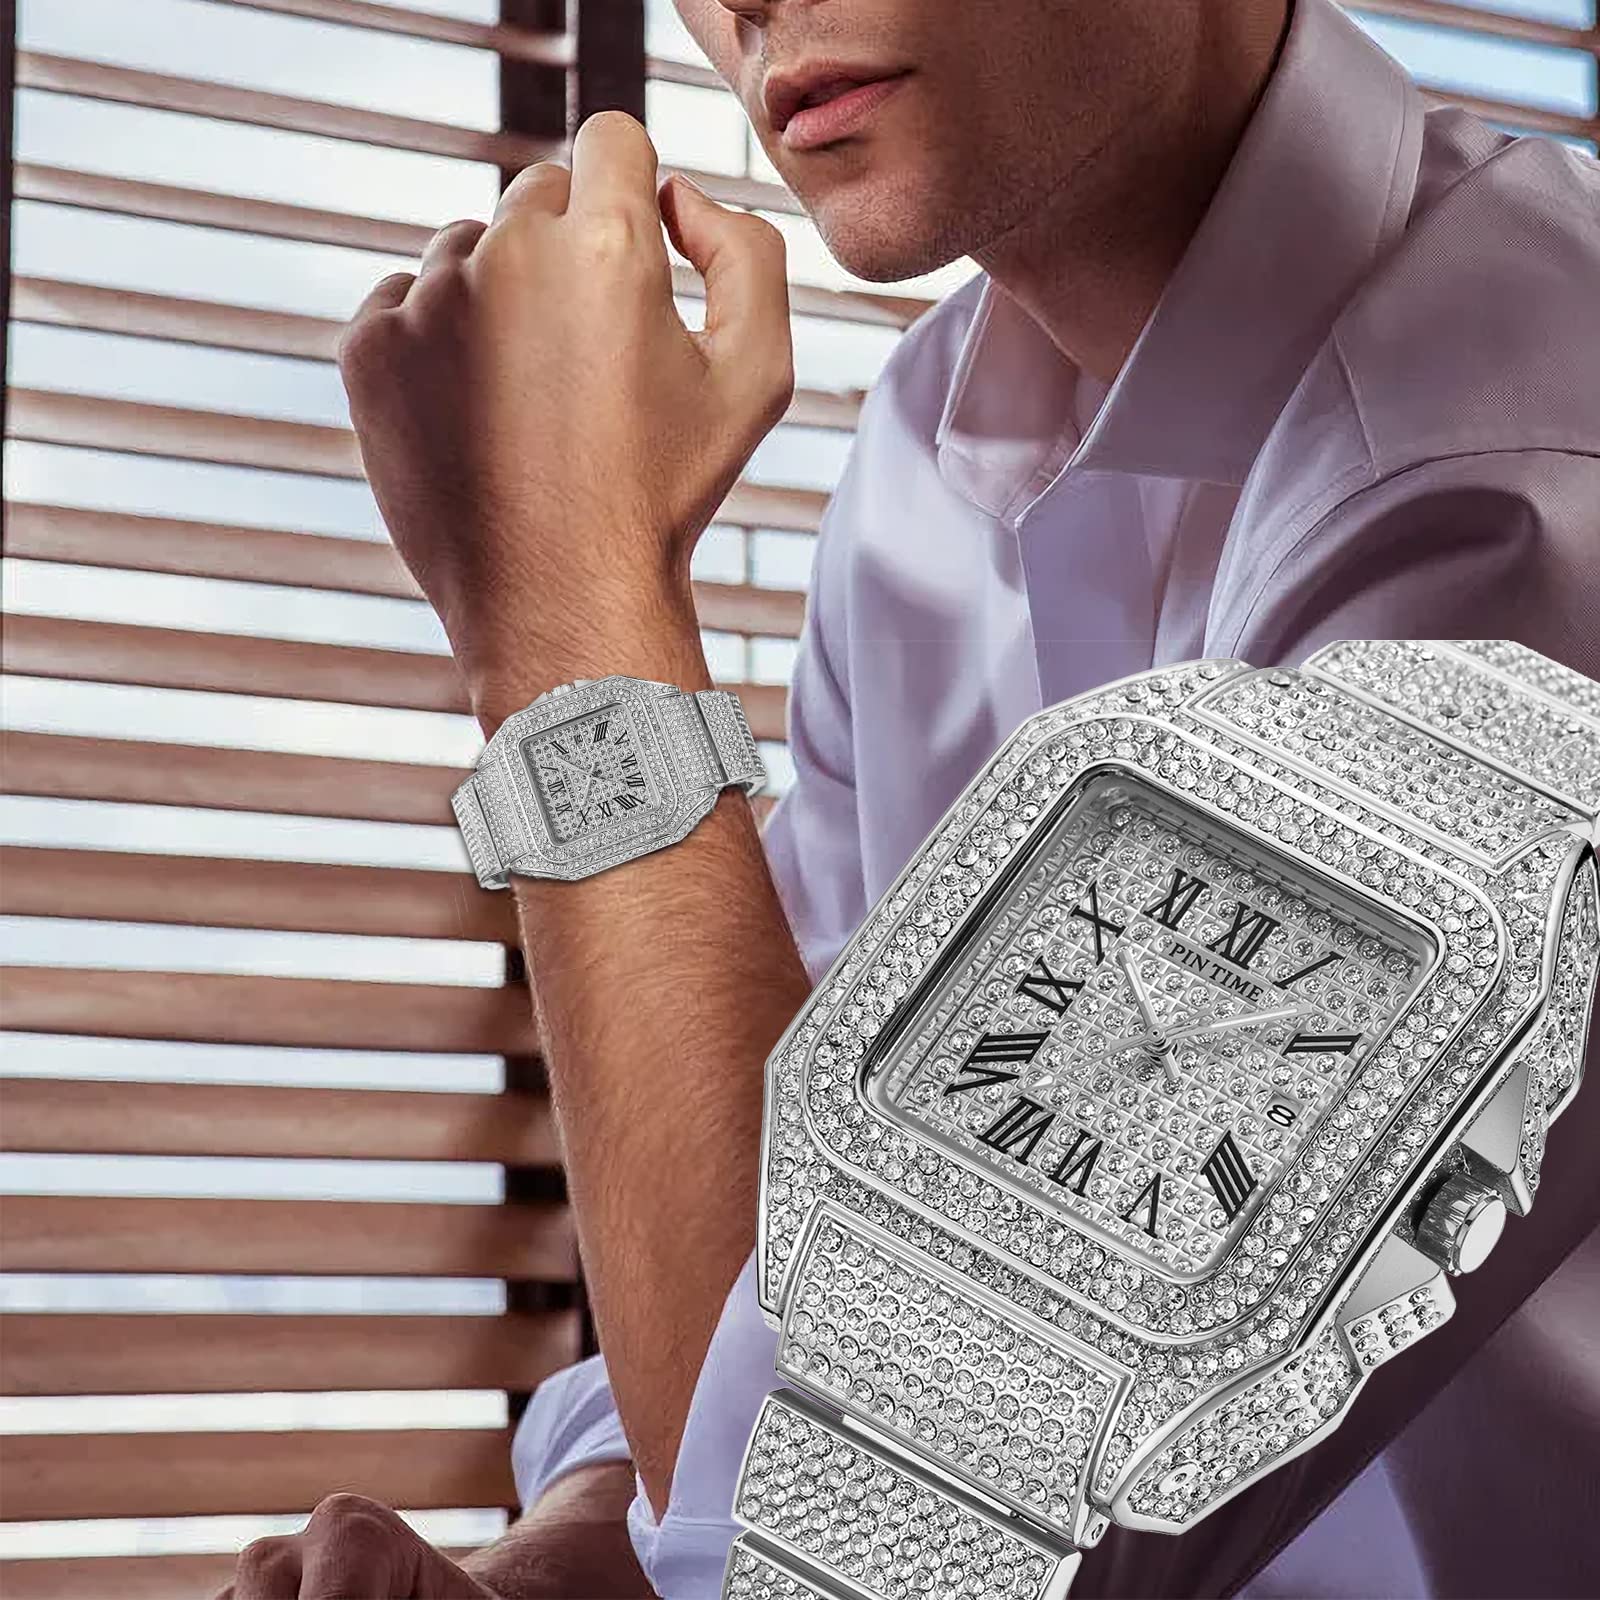 PINTIME Mens Full Iced Out 43mm Big Face Bling Luxury Crystal Square Watches Fashion Hip Hop Jewelry Watch for Men